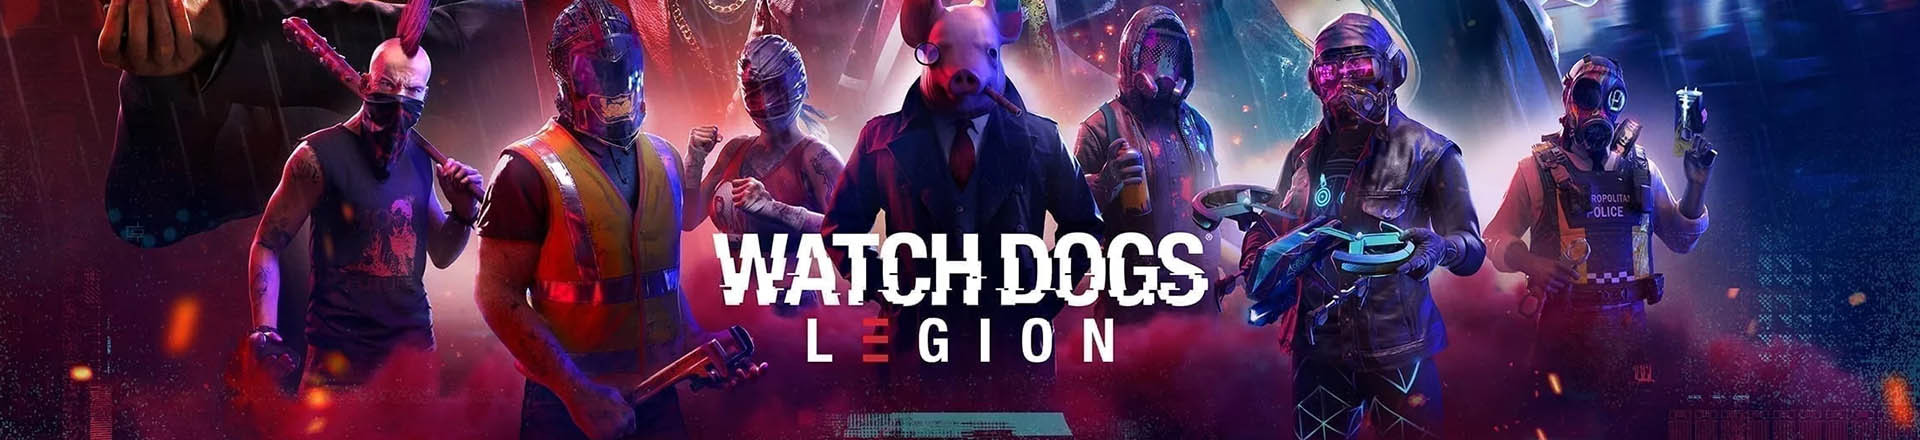 Gladiator Computers - Gaming PCs we recommend for Watch Dogs: Legion